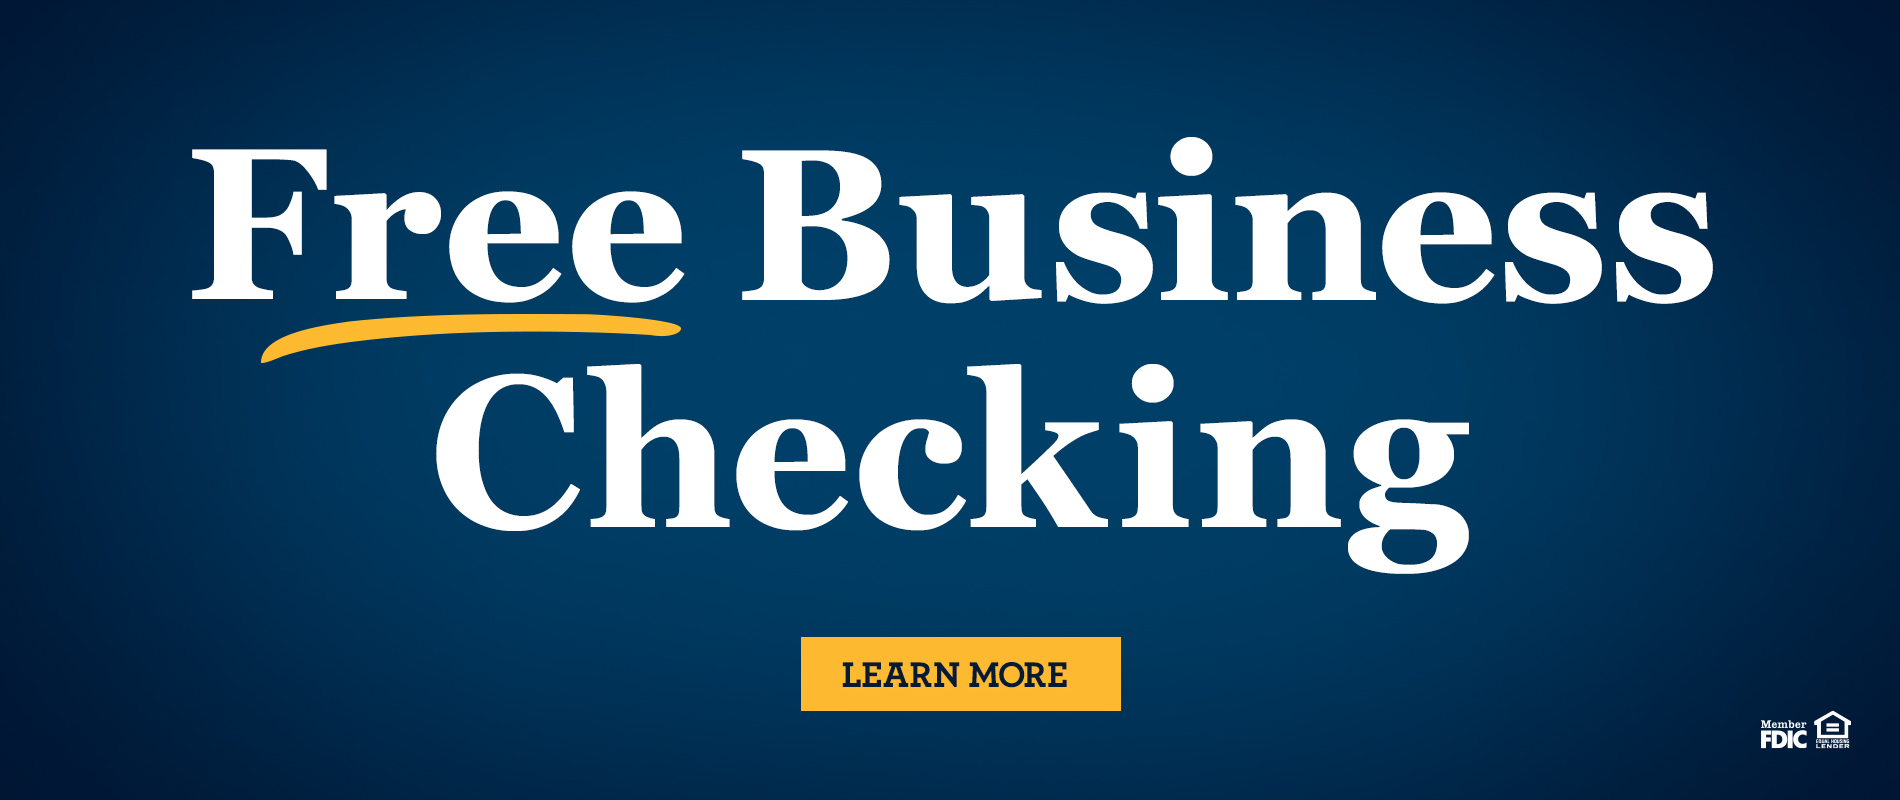 Free Business Checking